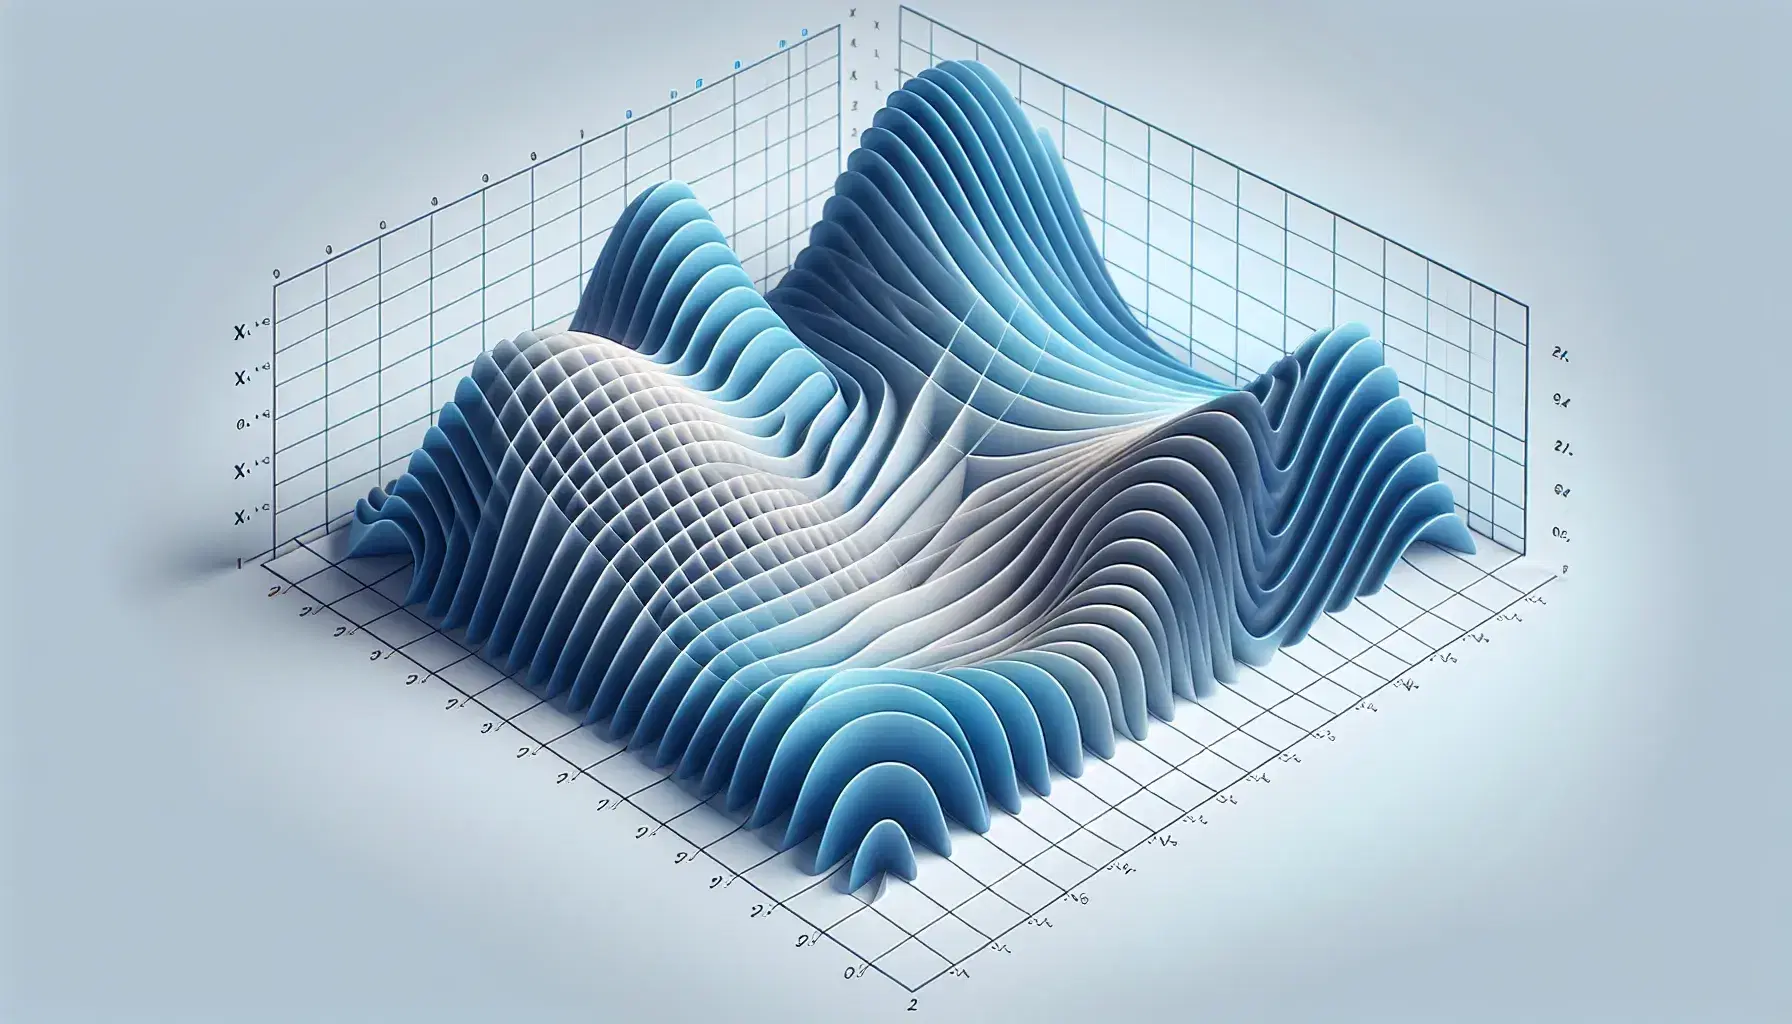 3D graph with wavy surfaces in shades of blue that increase in width along the x-axis, arranged in unlabeled Cartesian space.